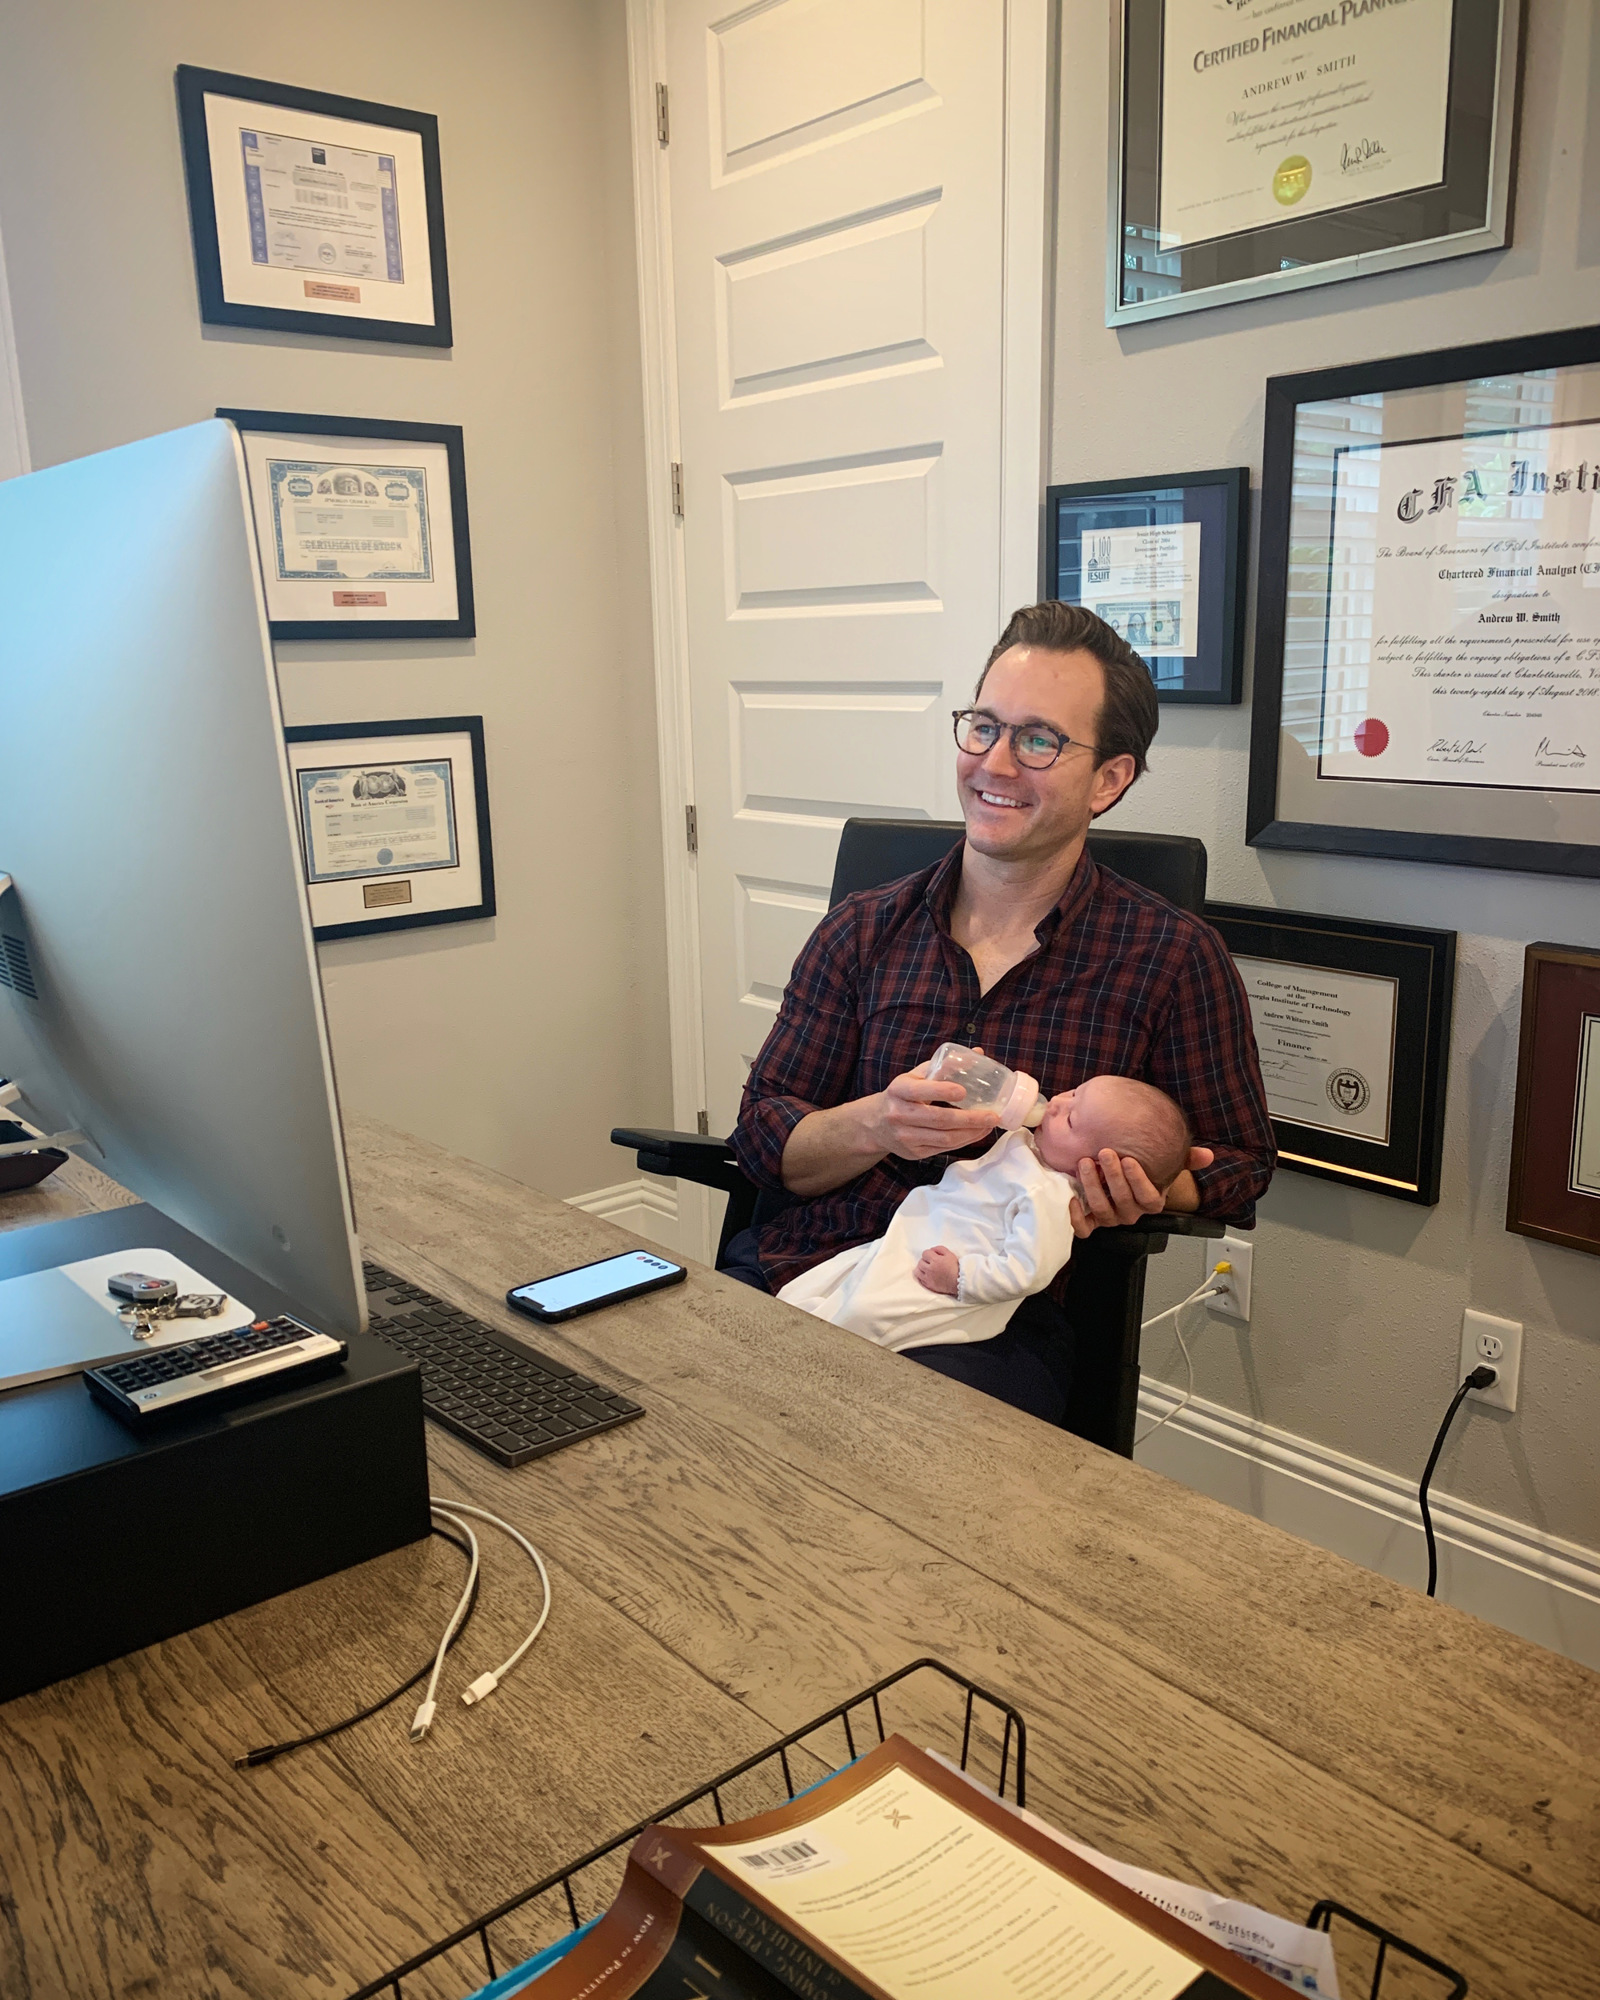 Courtesy. Andrew Smith cares for his infant daughter in his home office.